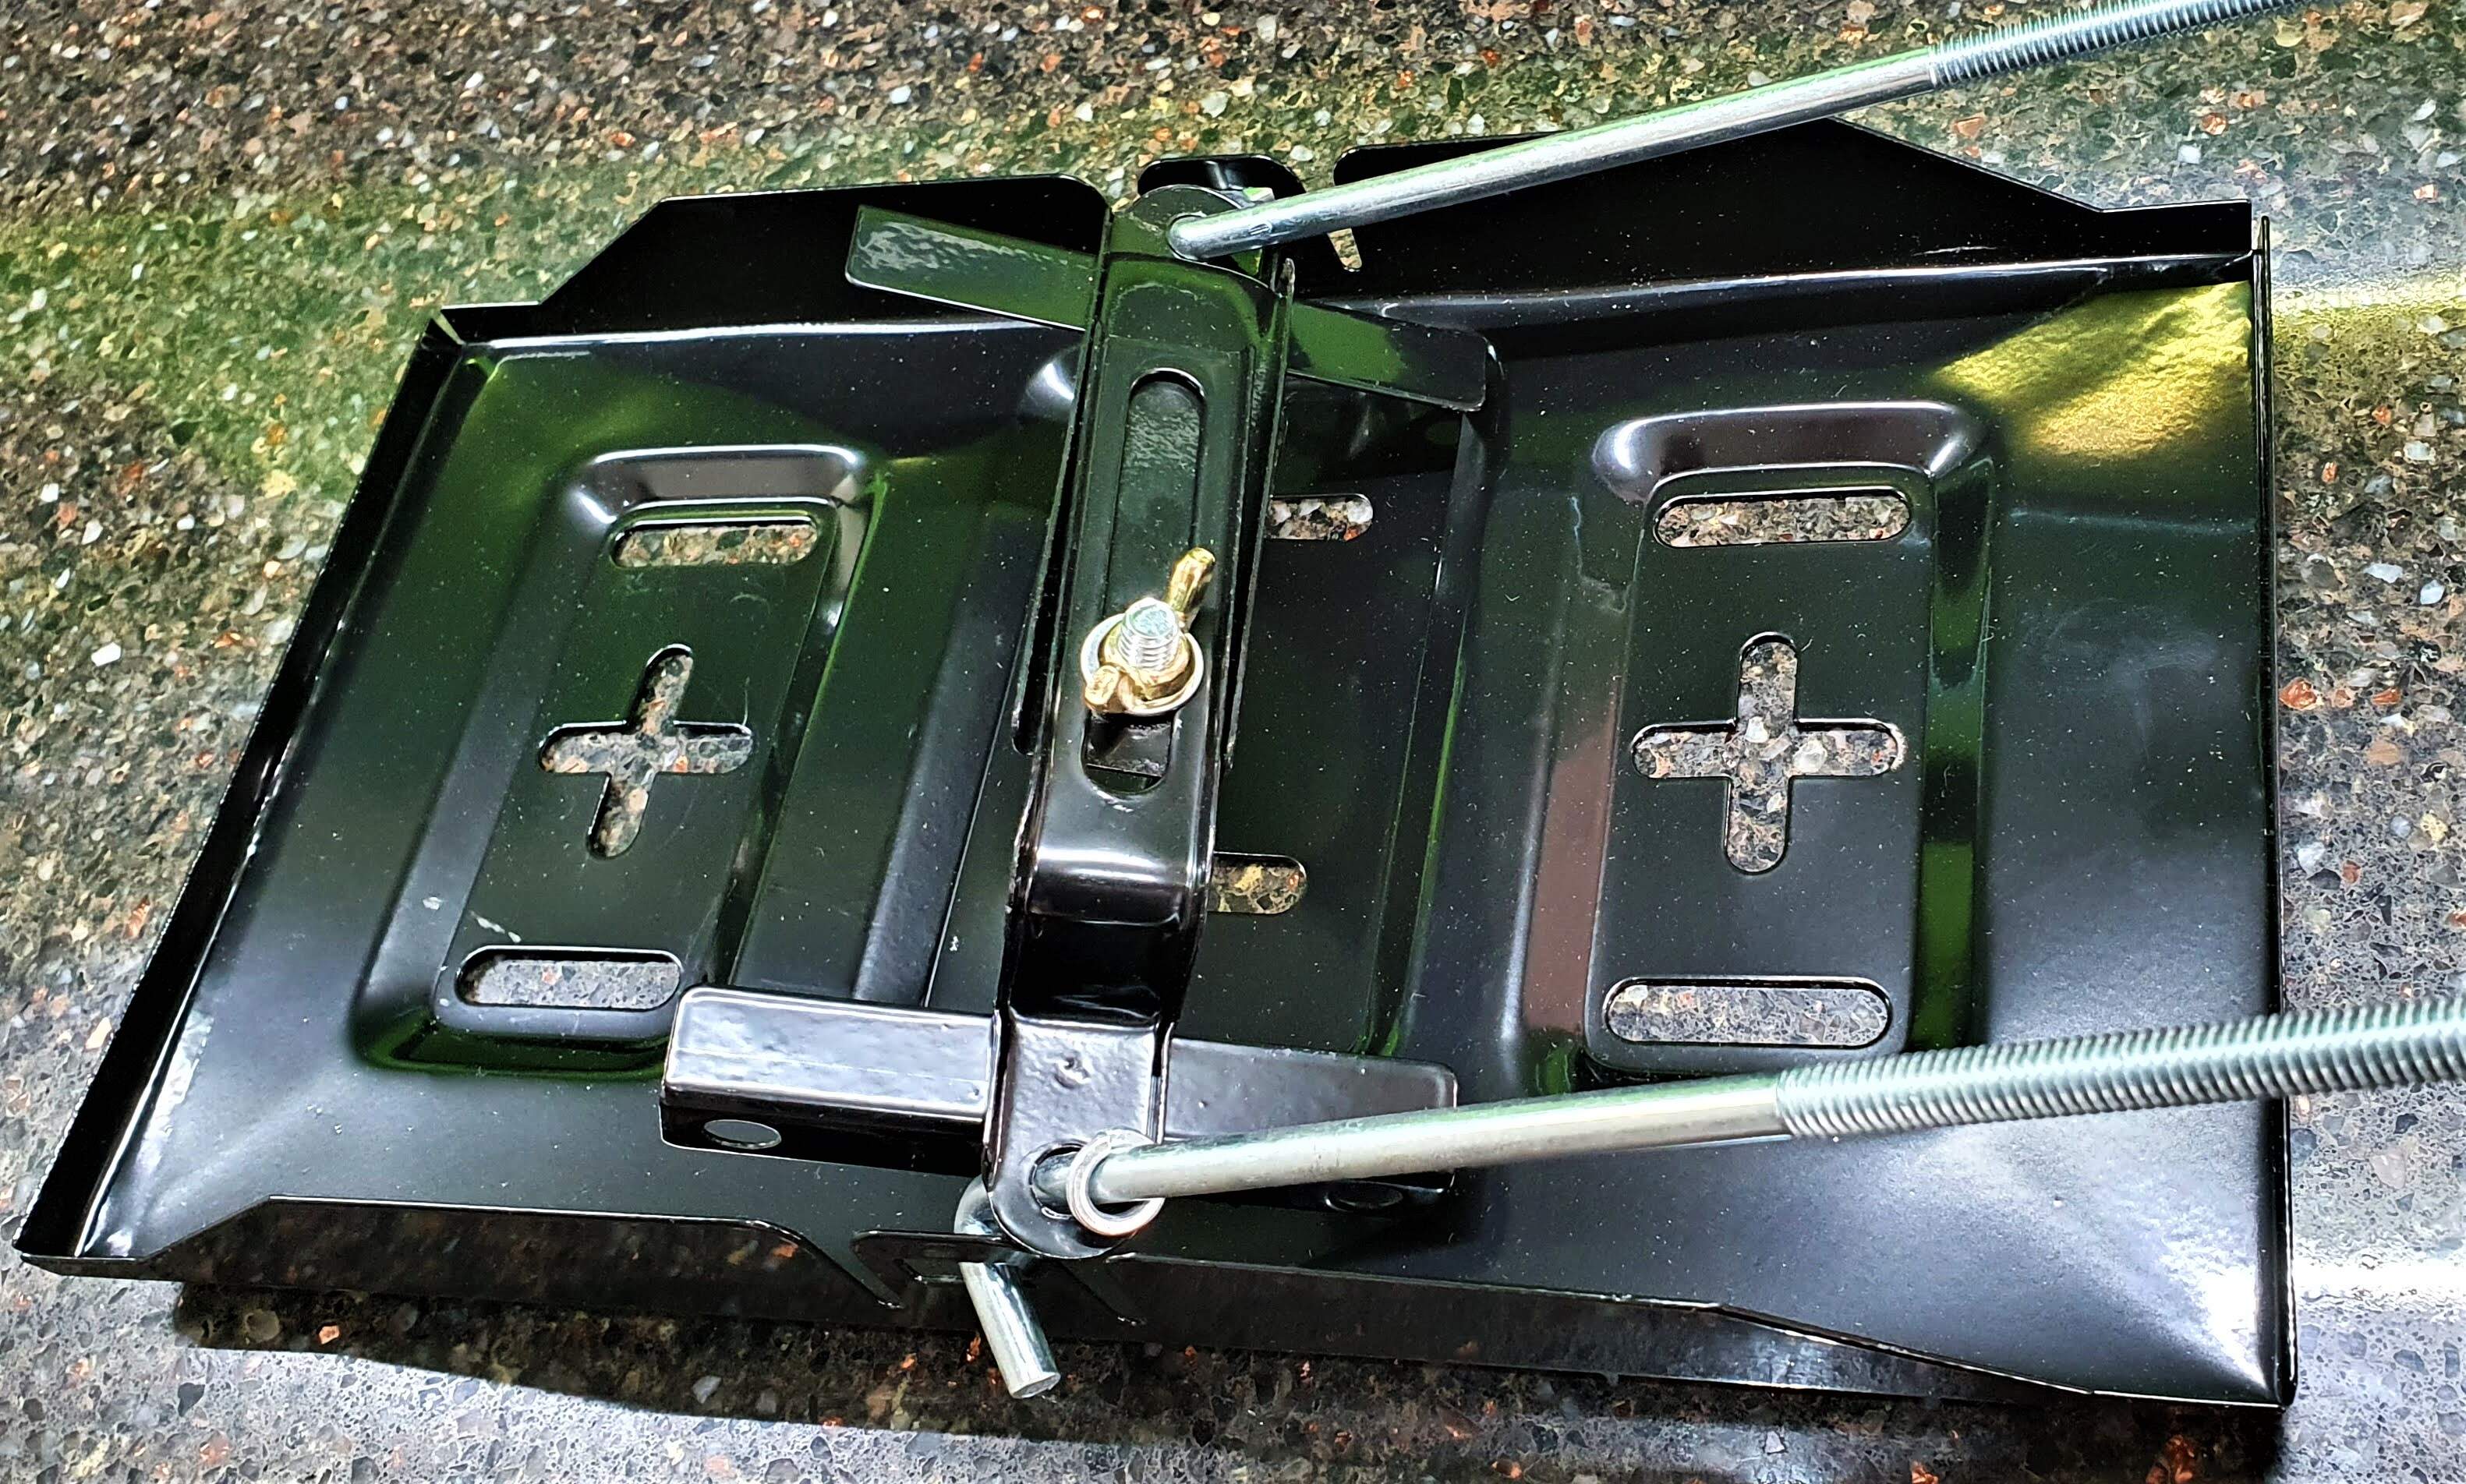 Universal Battery securing tray